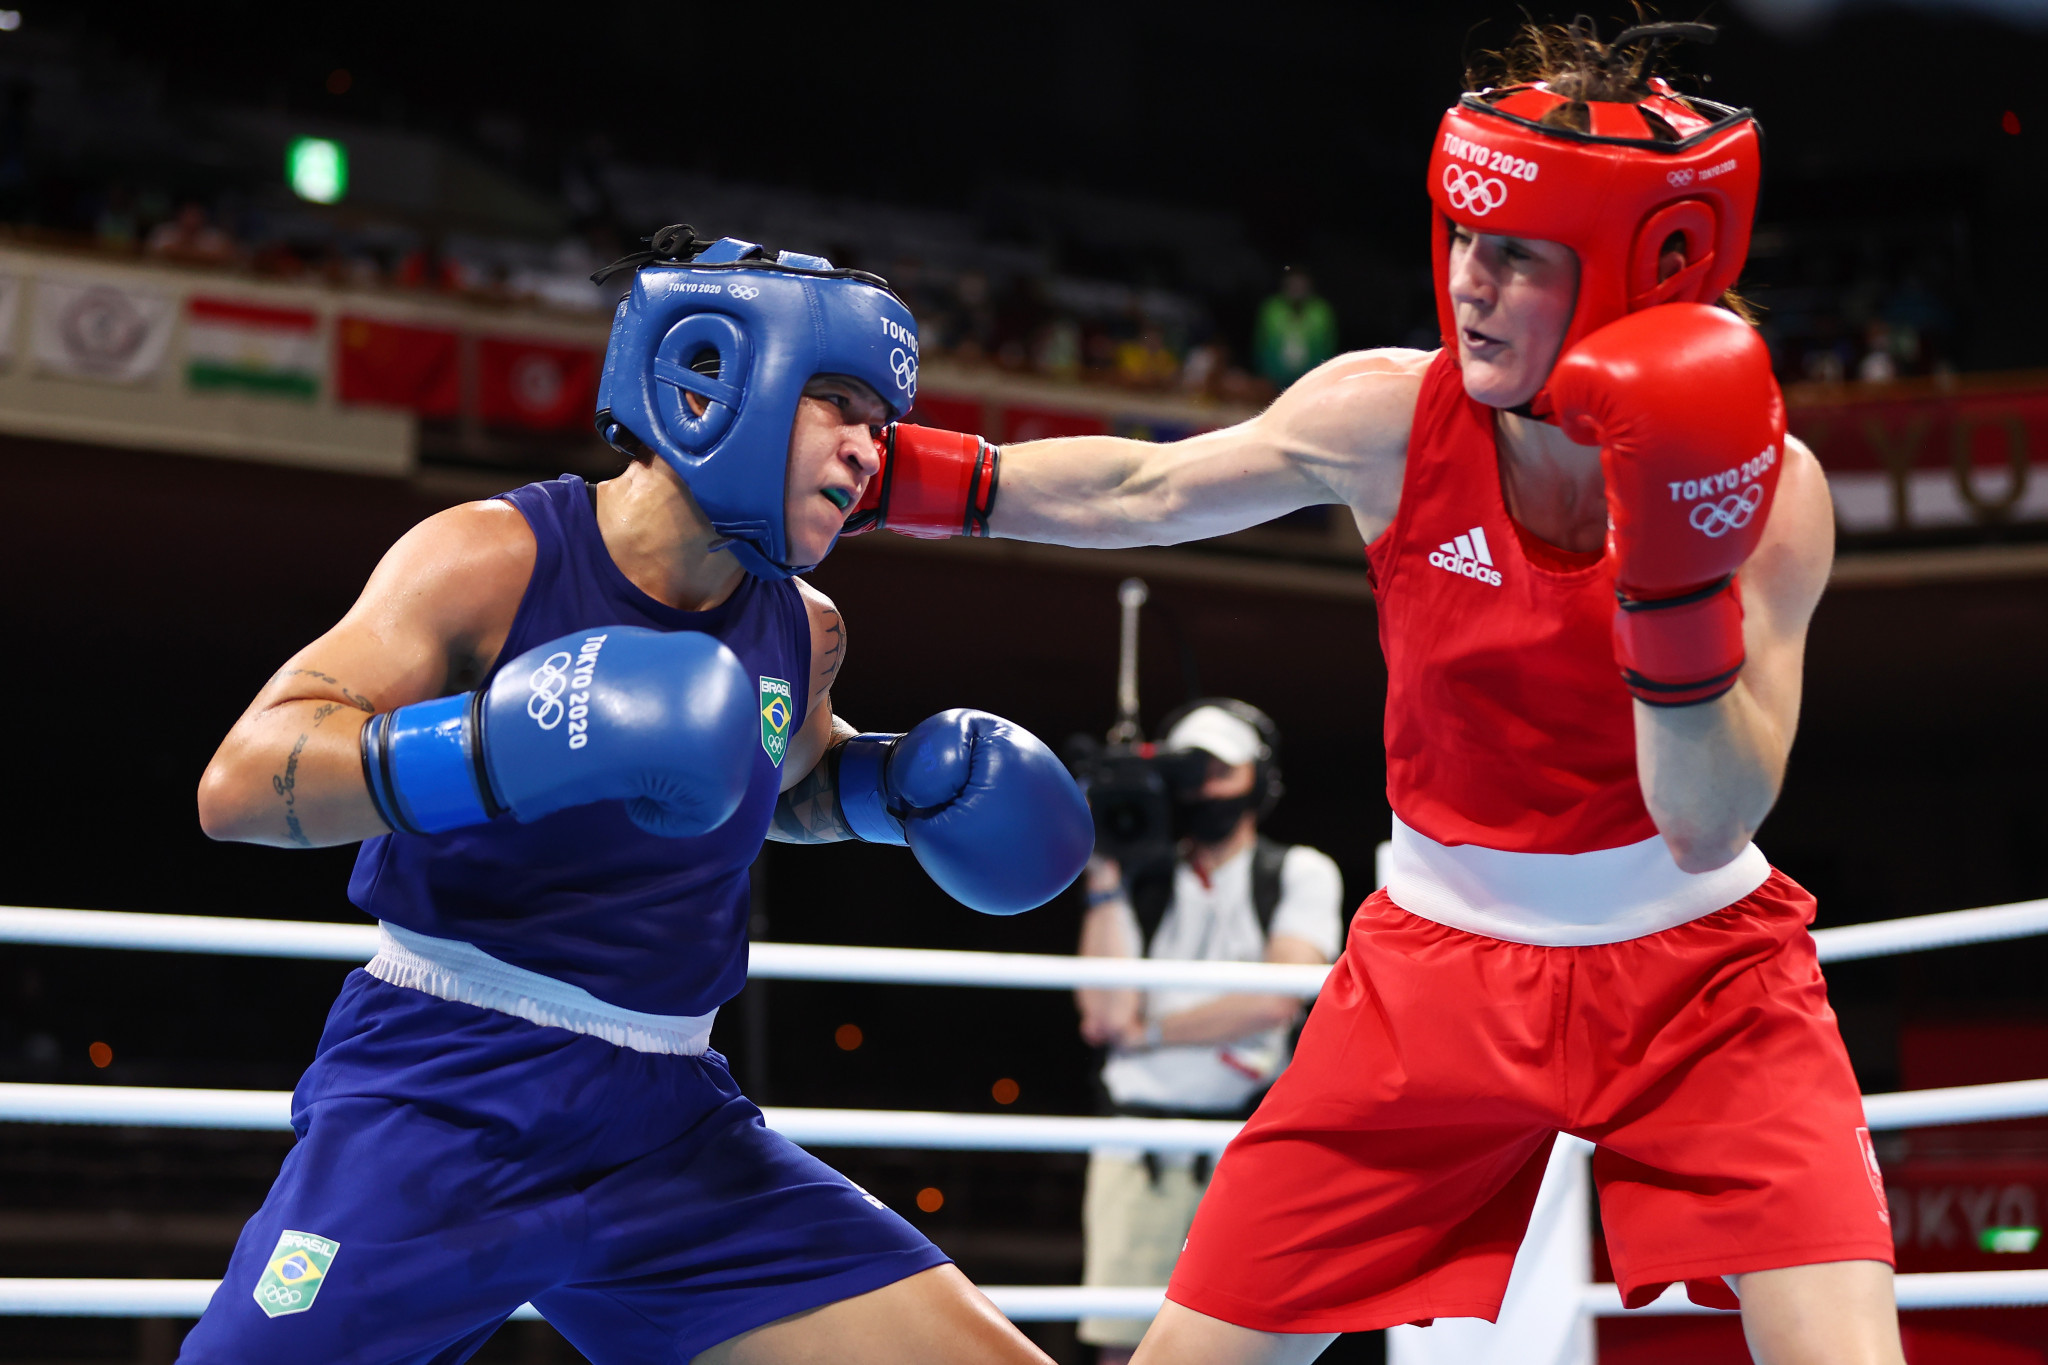 Boxing's place in the Olympics remains in doubt after being left off the inital list for Los Angeles 2028 ©Getty Images